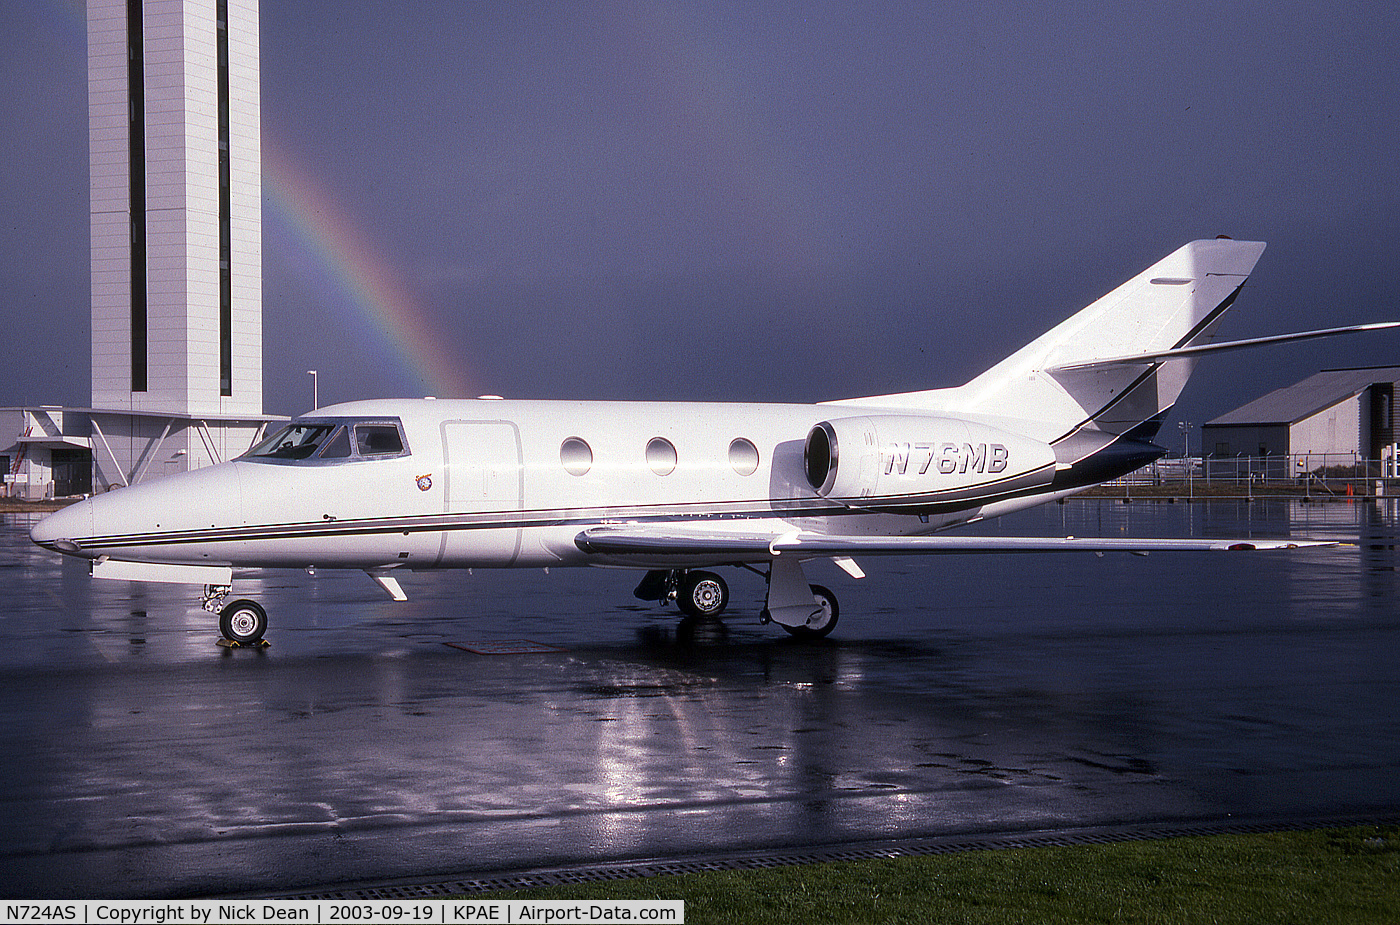 N724AS, 1976 Dassault Falcon 10 C/N 83, KPAE (Seen here as N76MB this airframe is currently registered N724AS as posted)